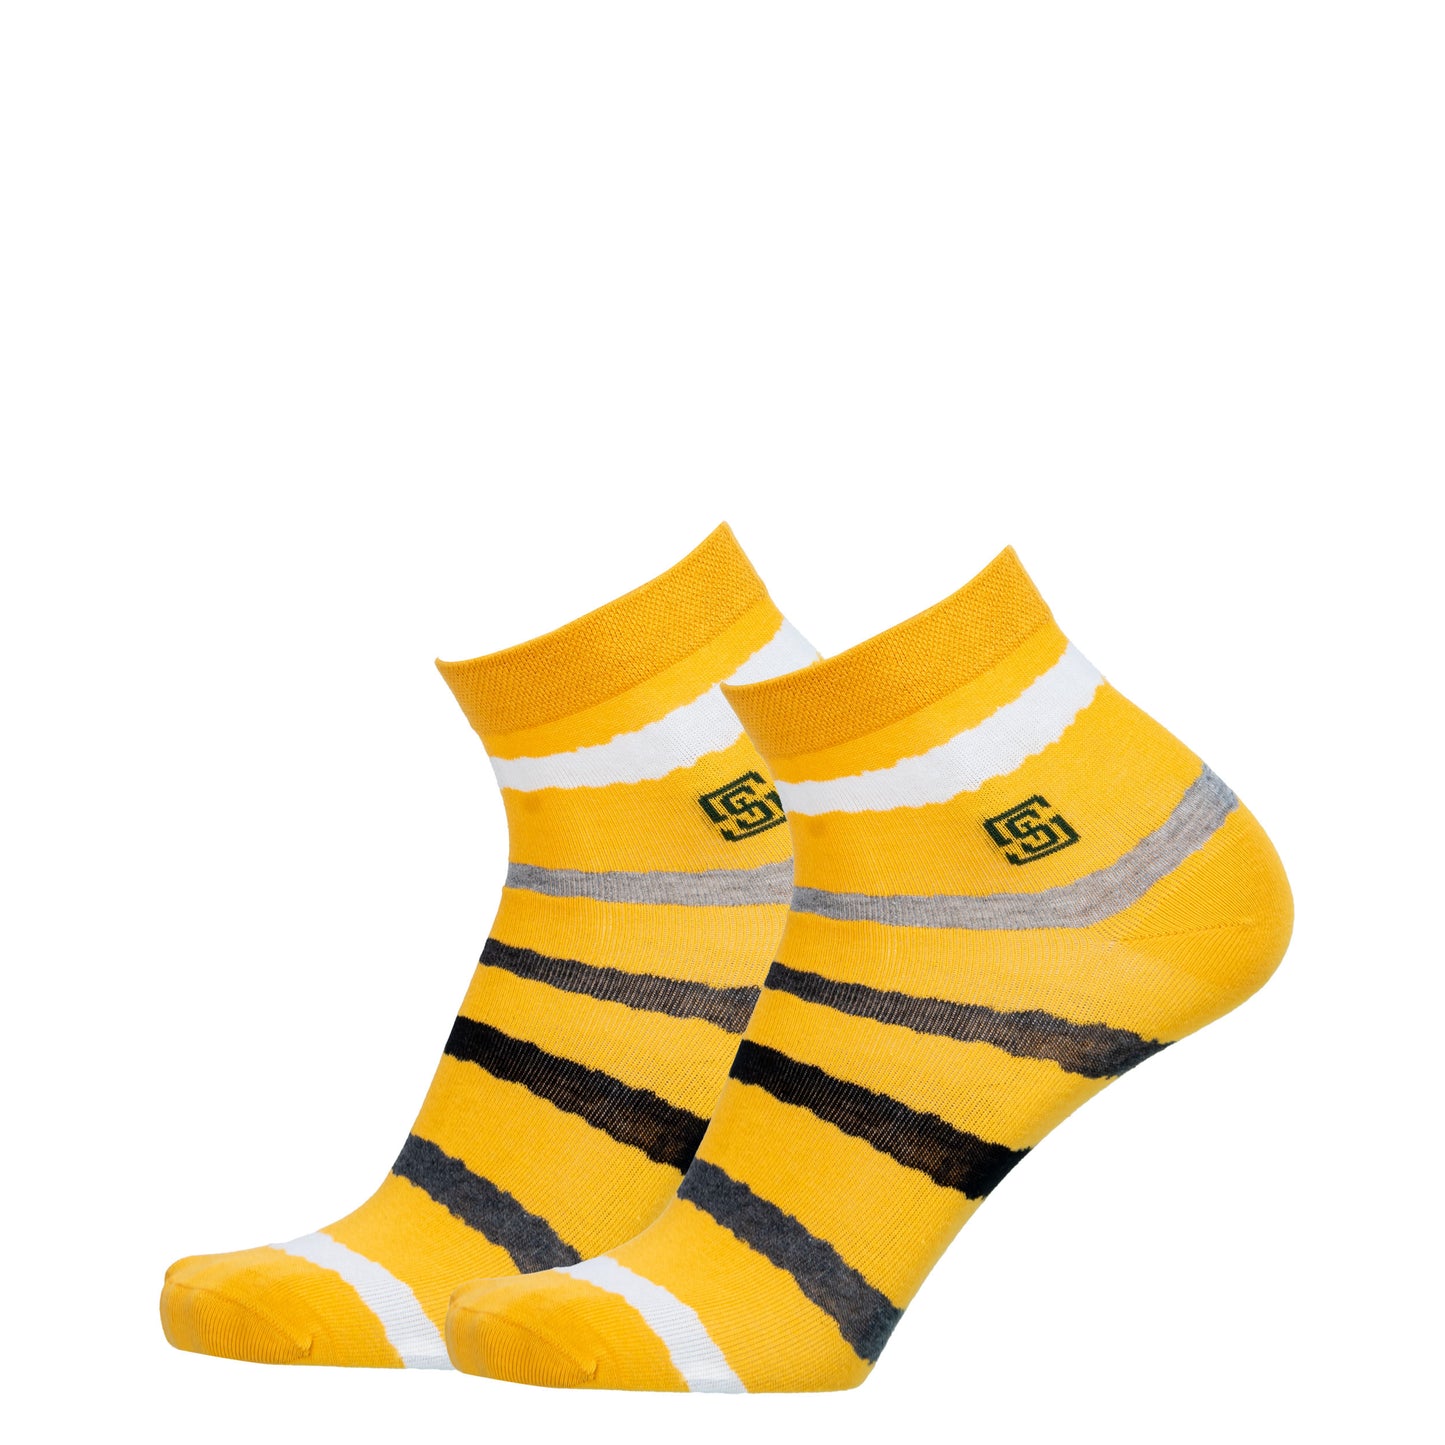 MULTI SURGE YELLOW - ANKLE